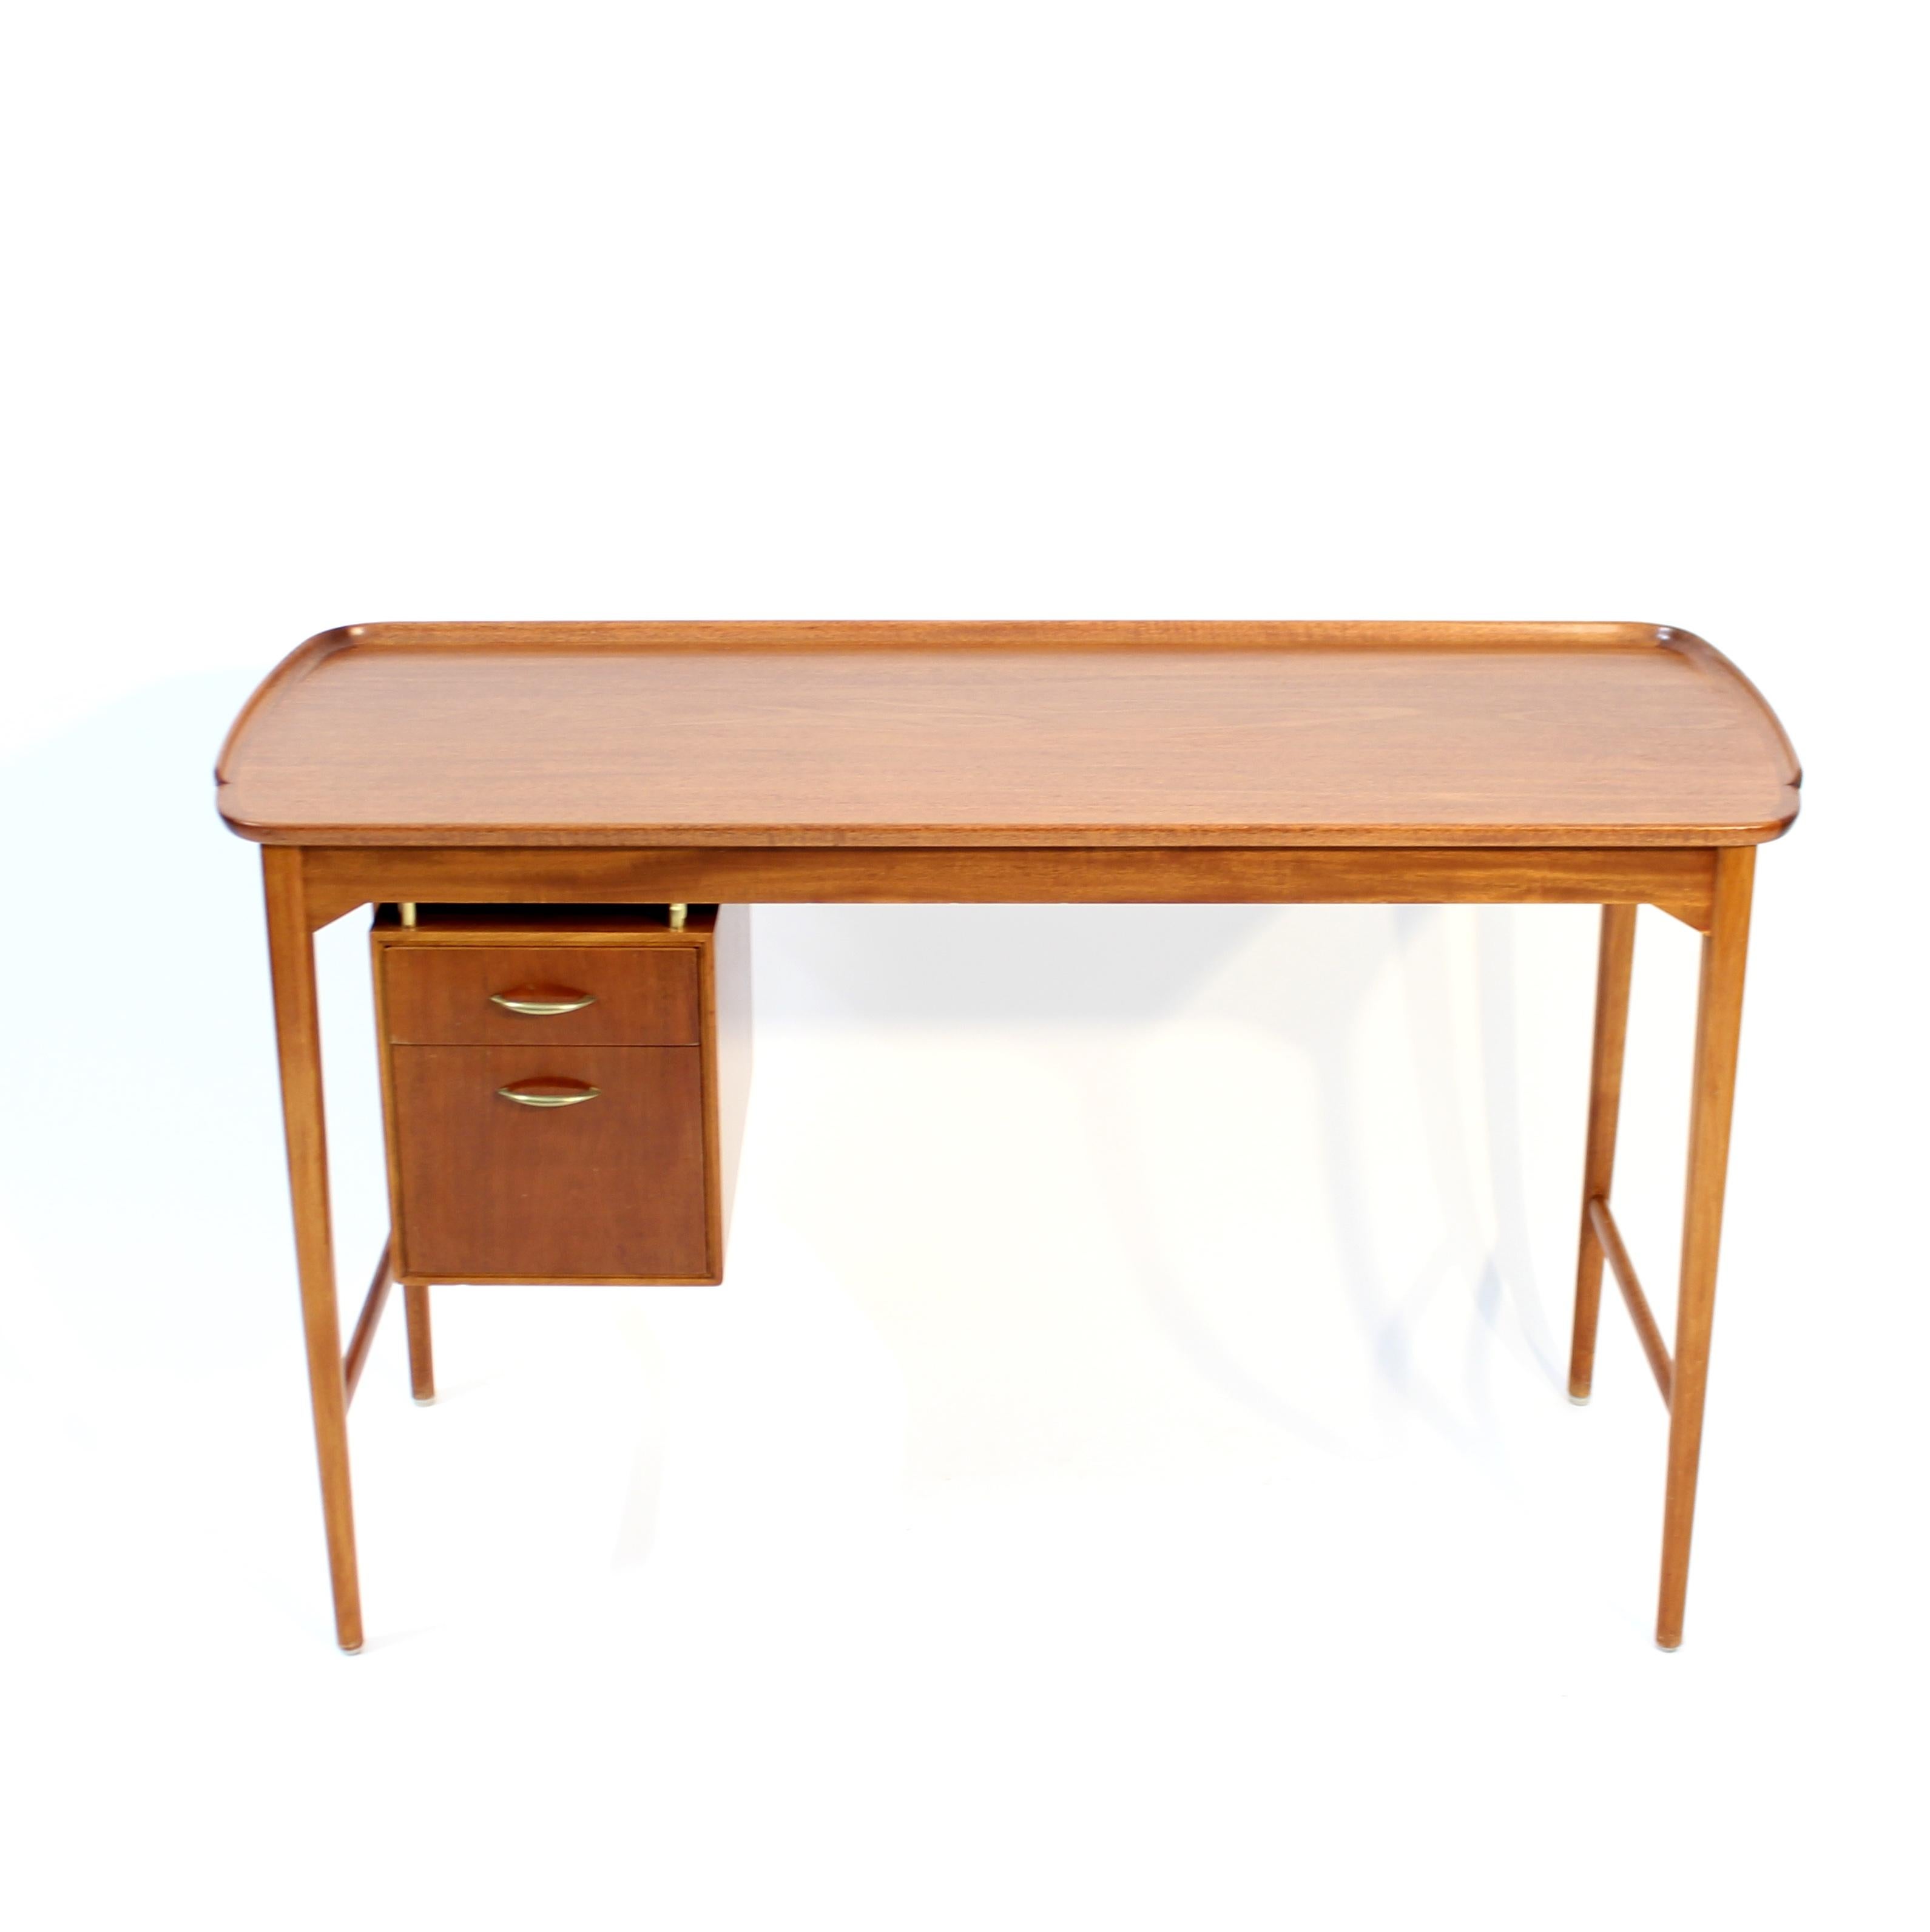 Brass Scandinavian Mahogany free standing desk with two drawers, 1950s